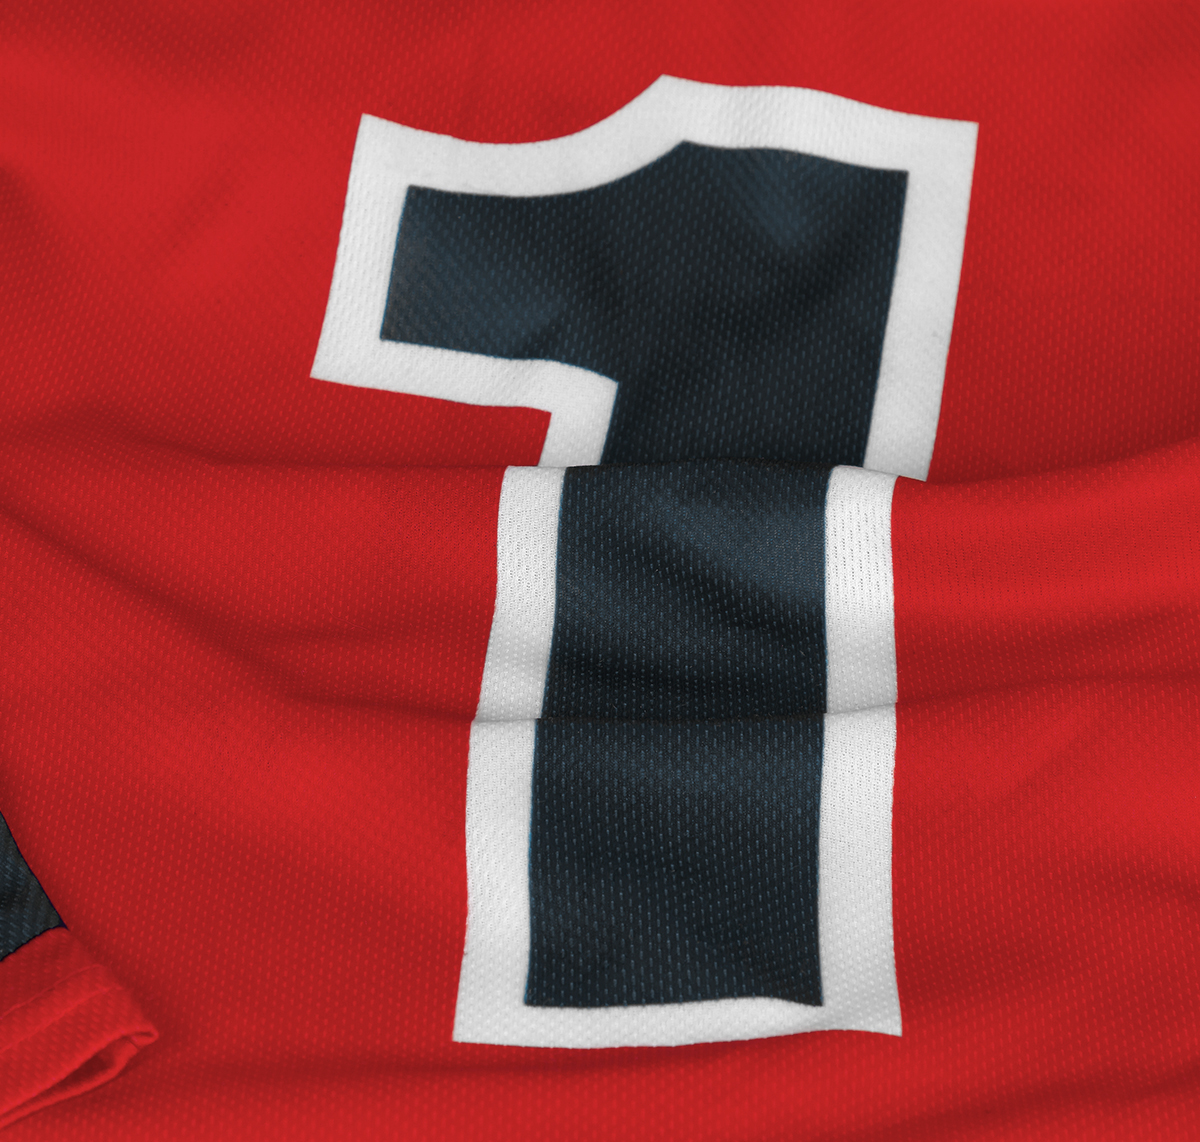 jersey showing heat transfer printing with number 1